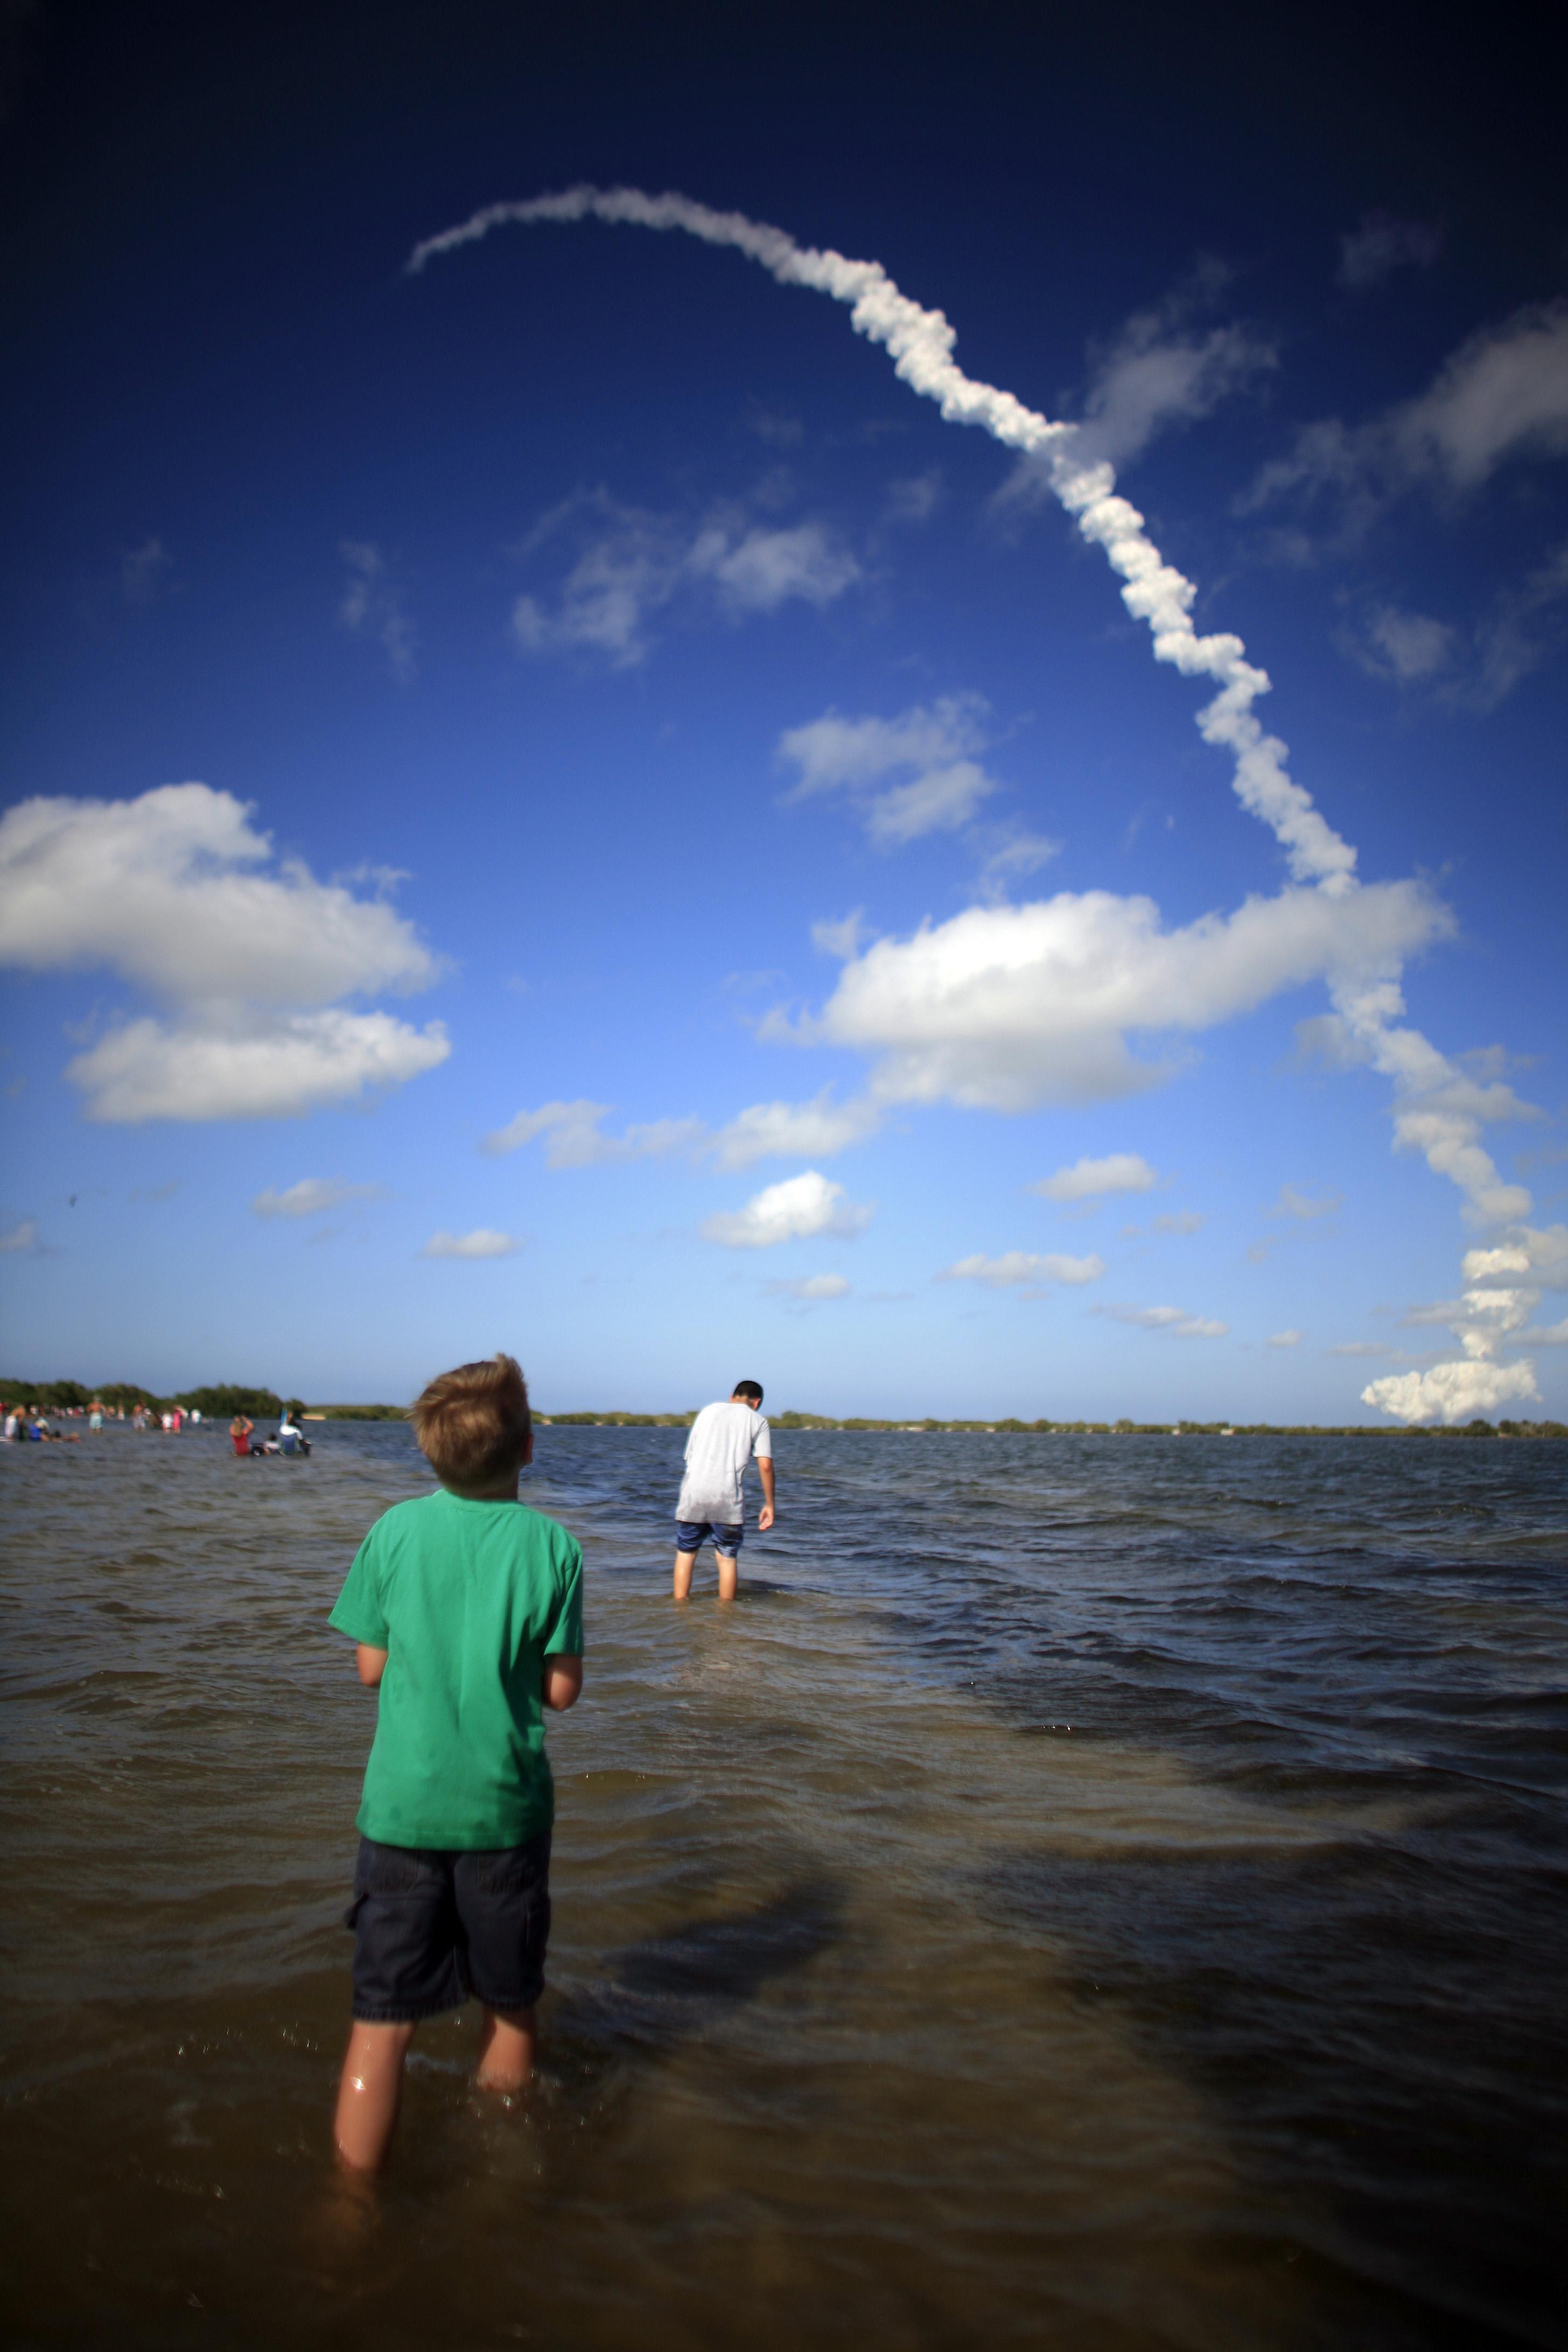 Space shuttle Discovery lifts off, bringing 'hope